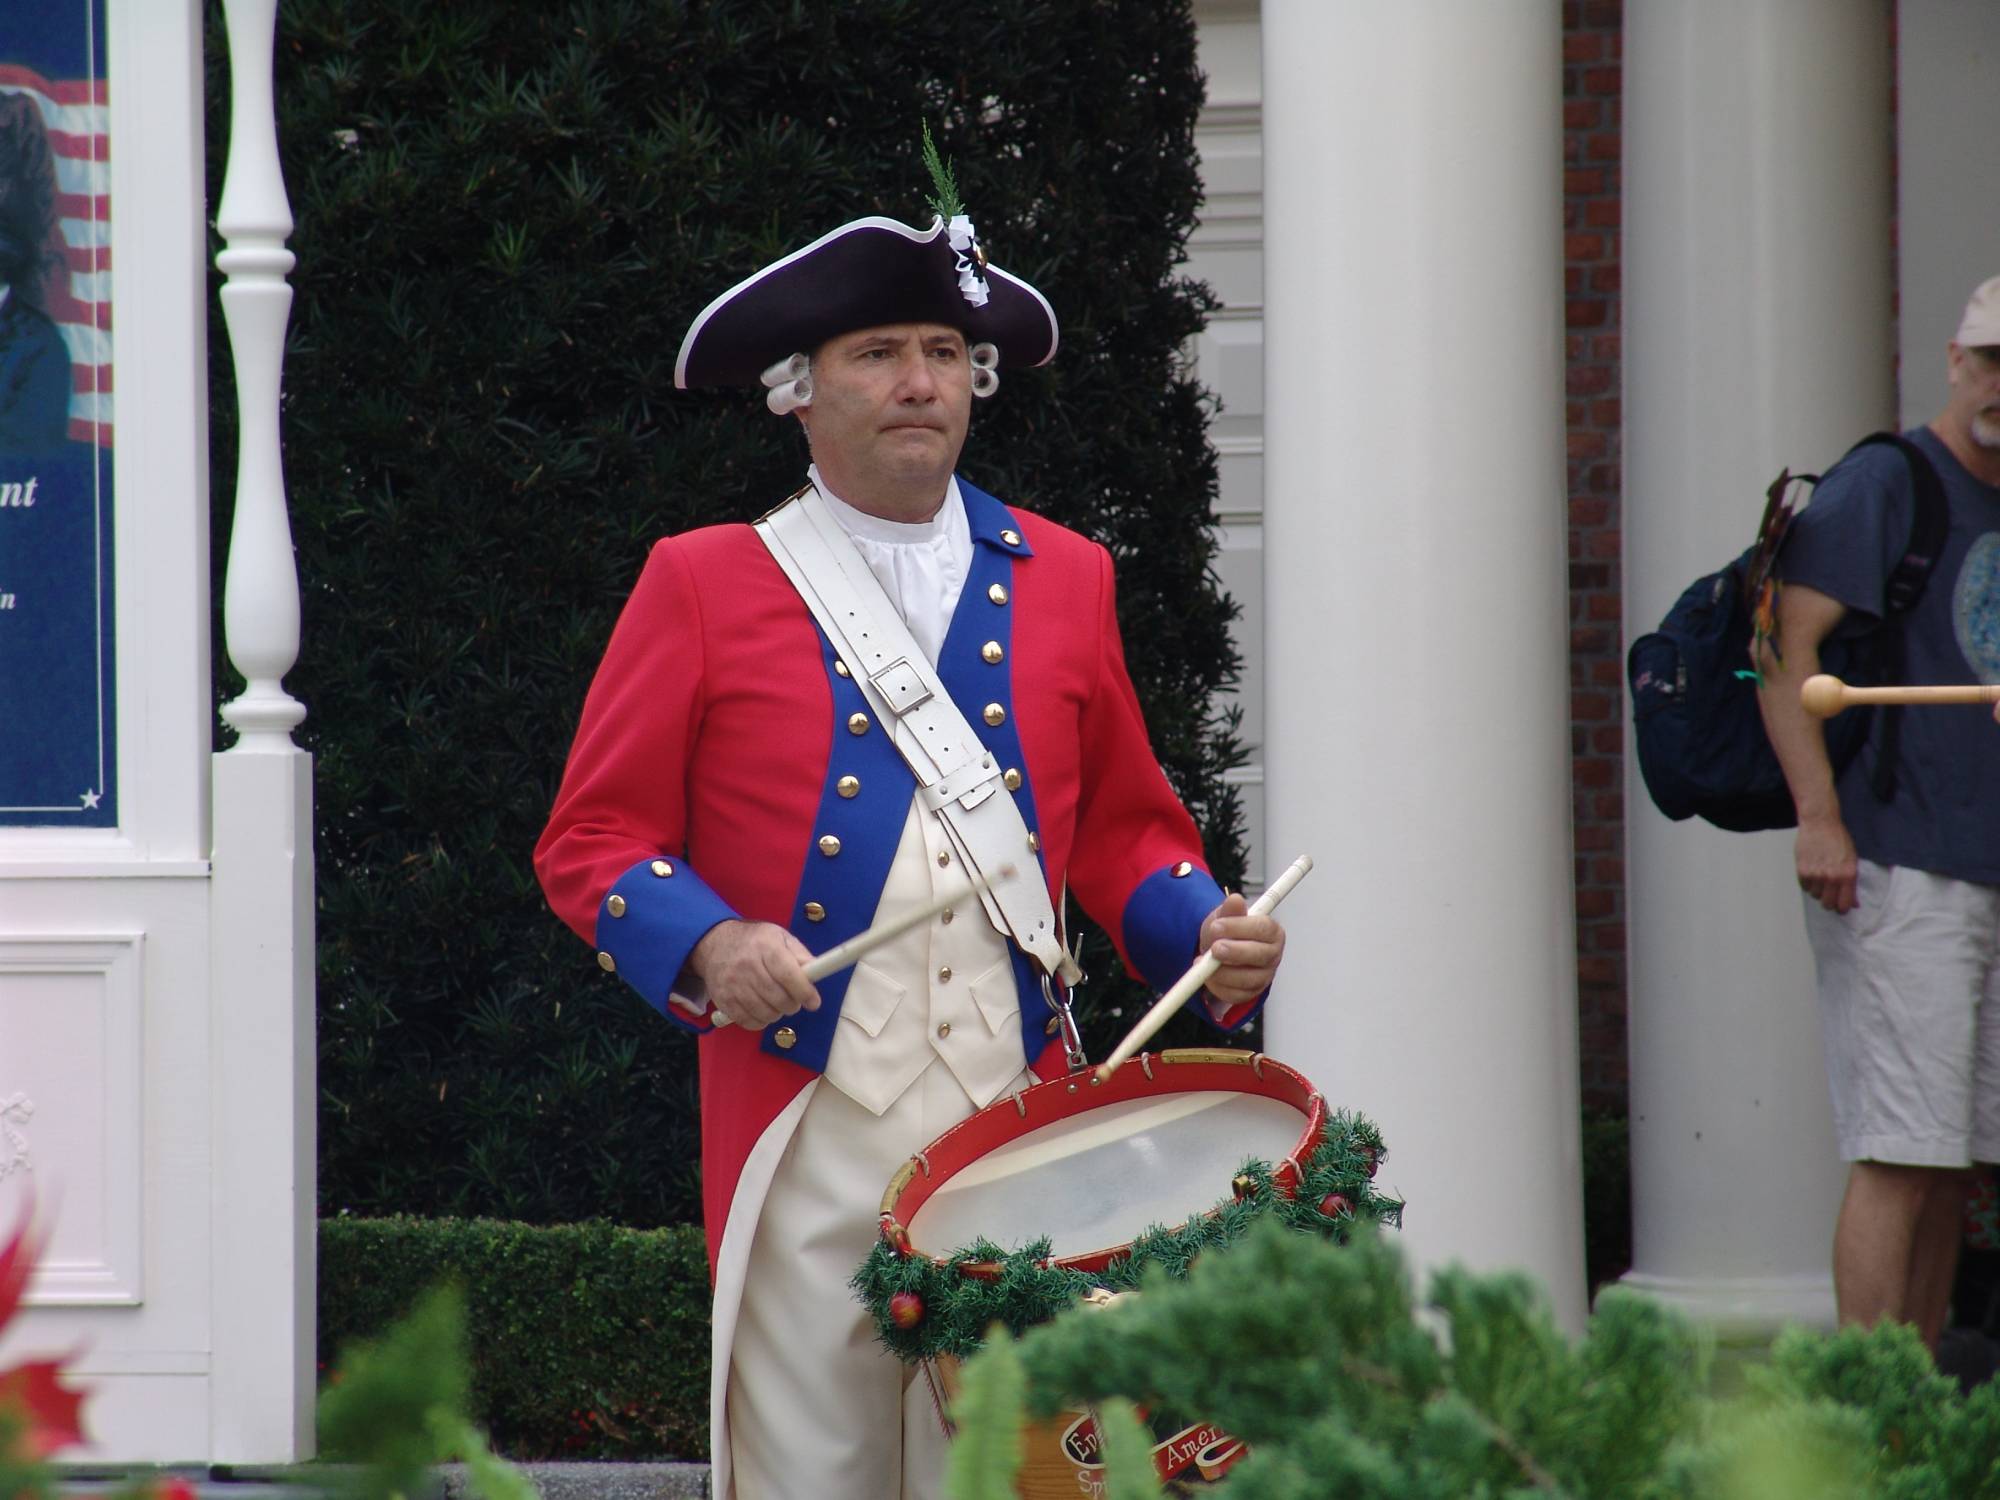 Epcot - American Adventure Fife and Drum Corps